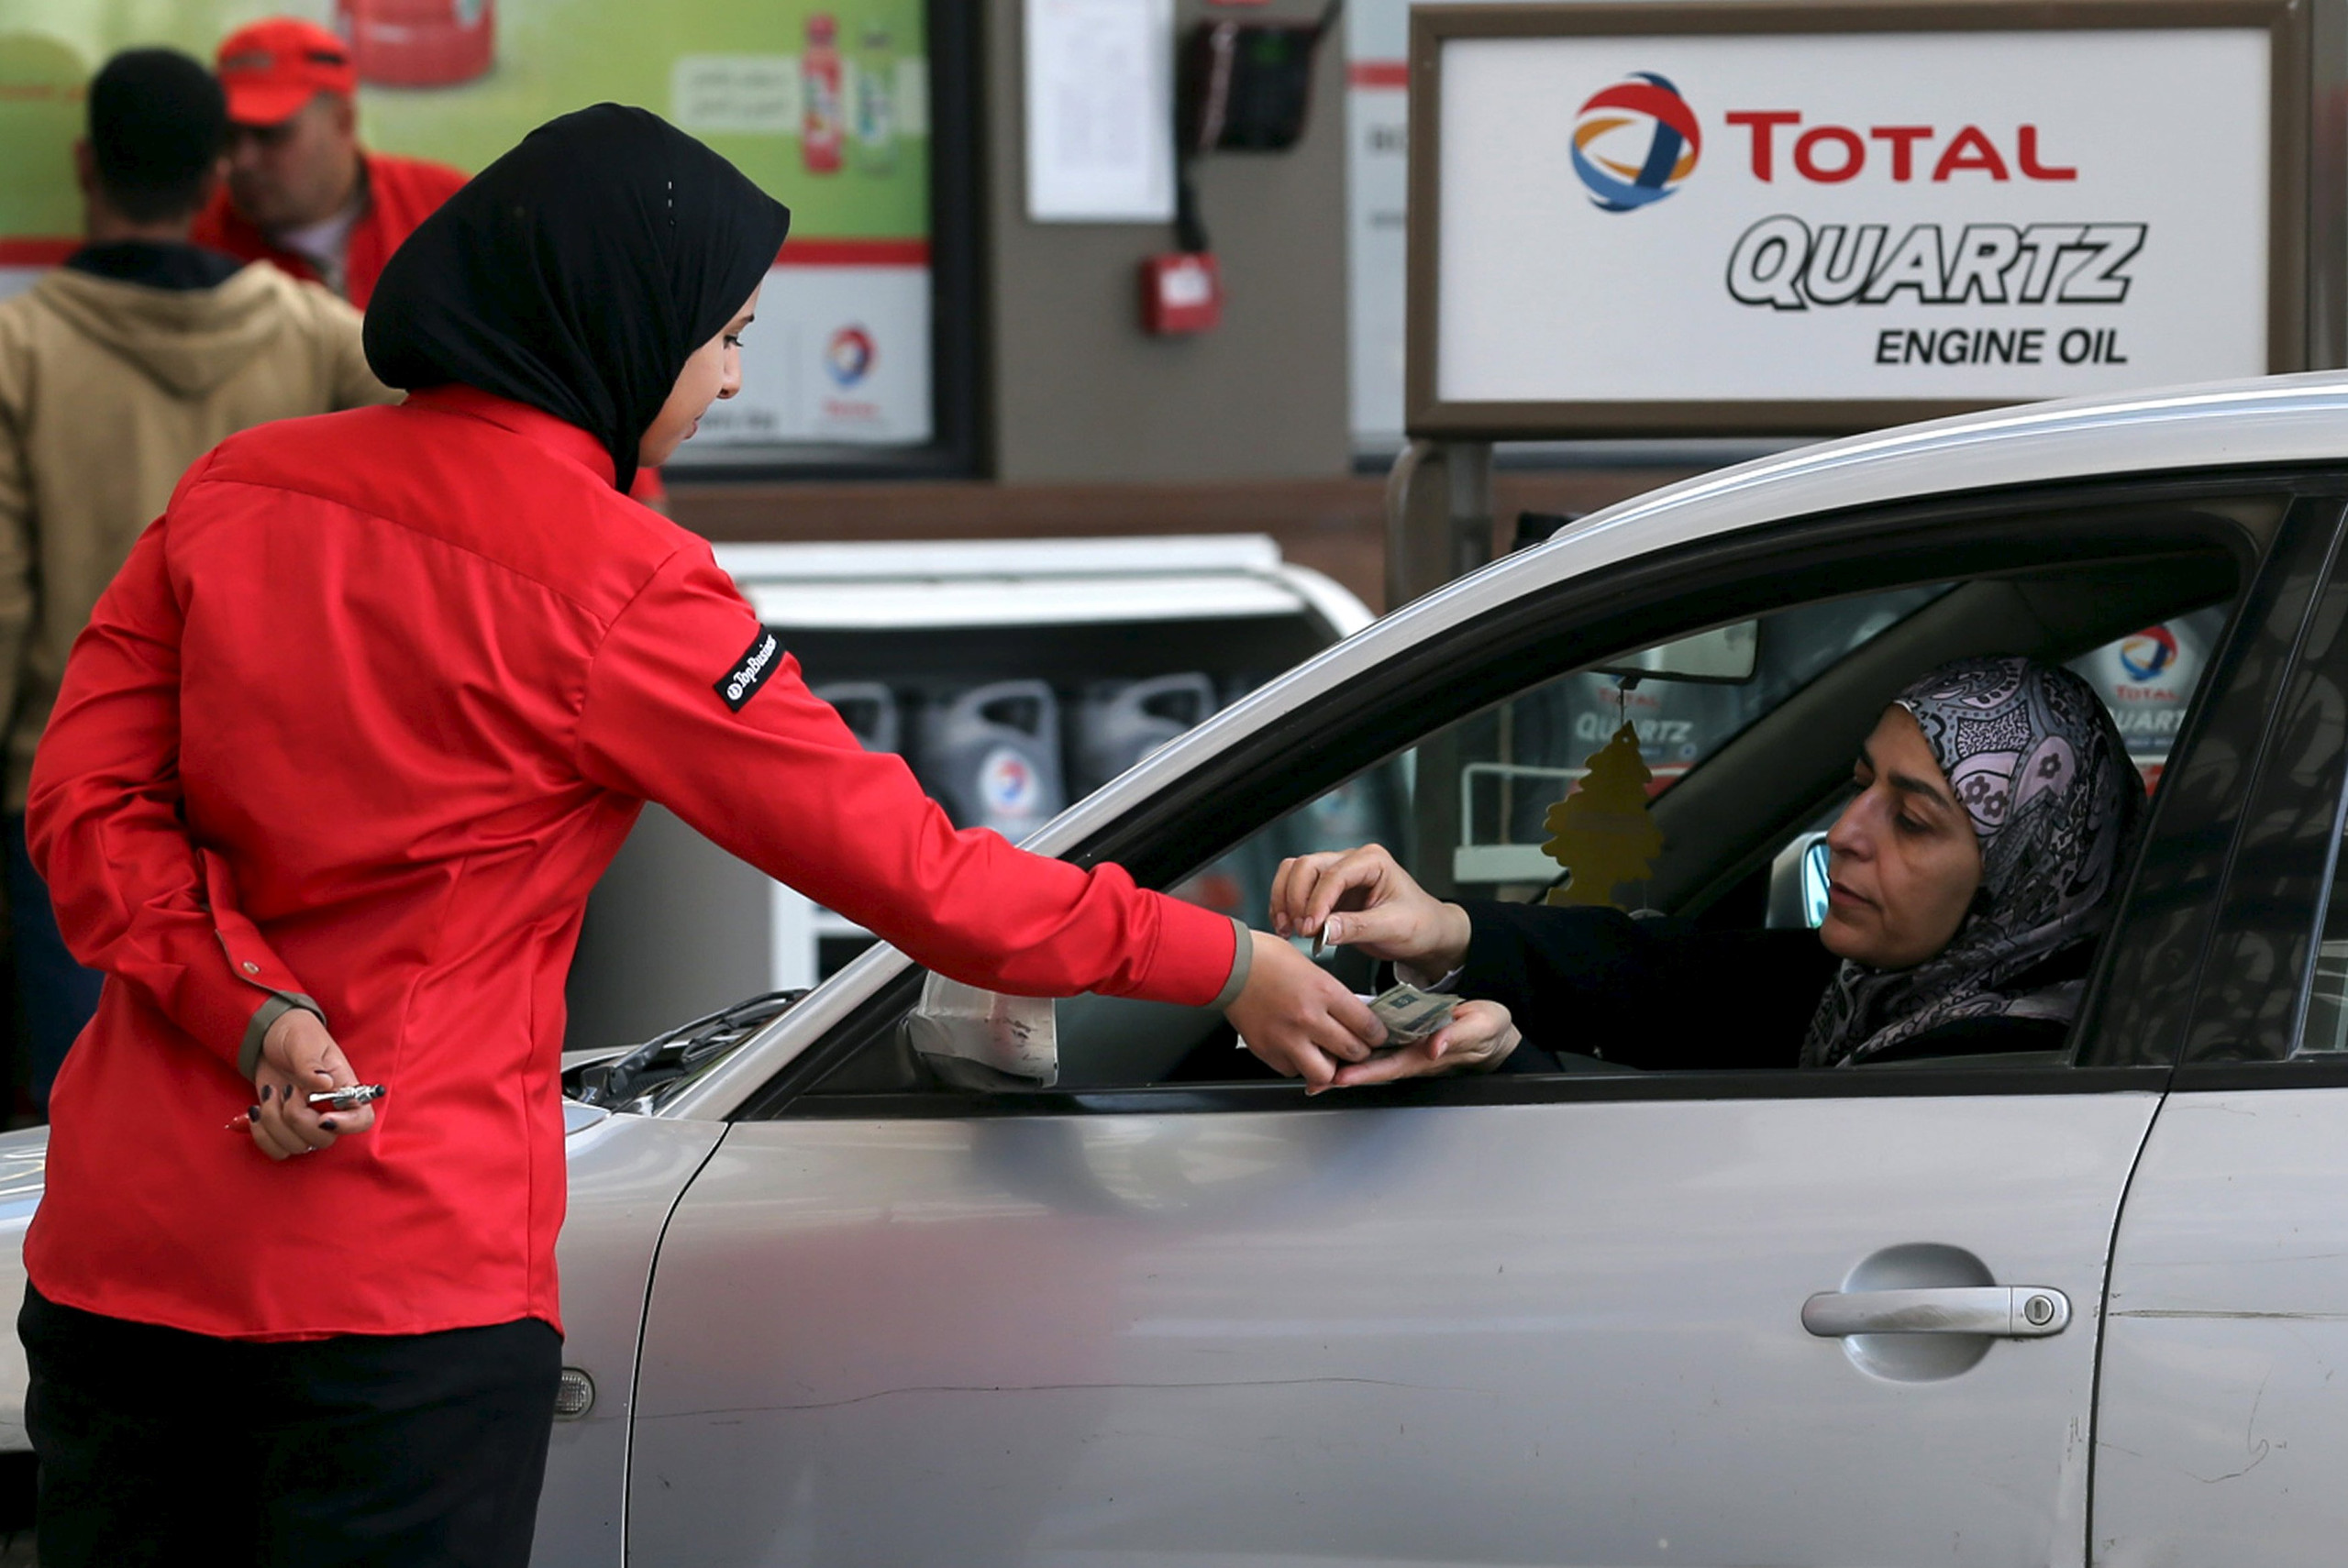 A female employee is seen at work at a petrol station in Cairo